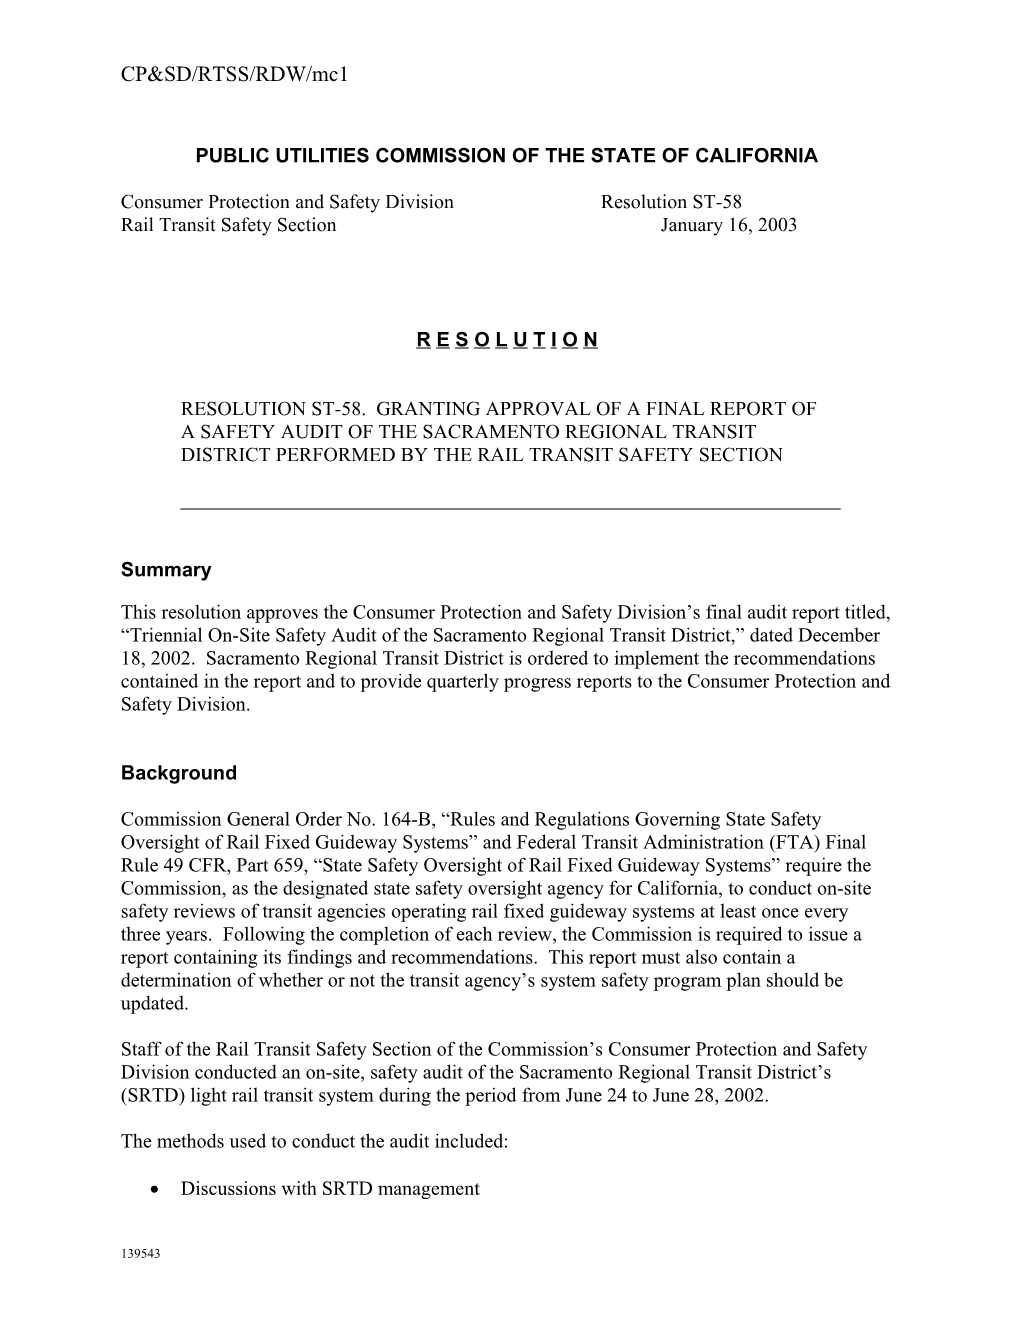 Public Utilities Commission of the State of California s48